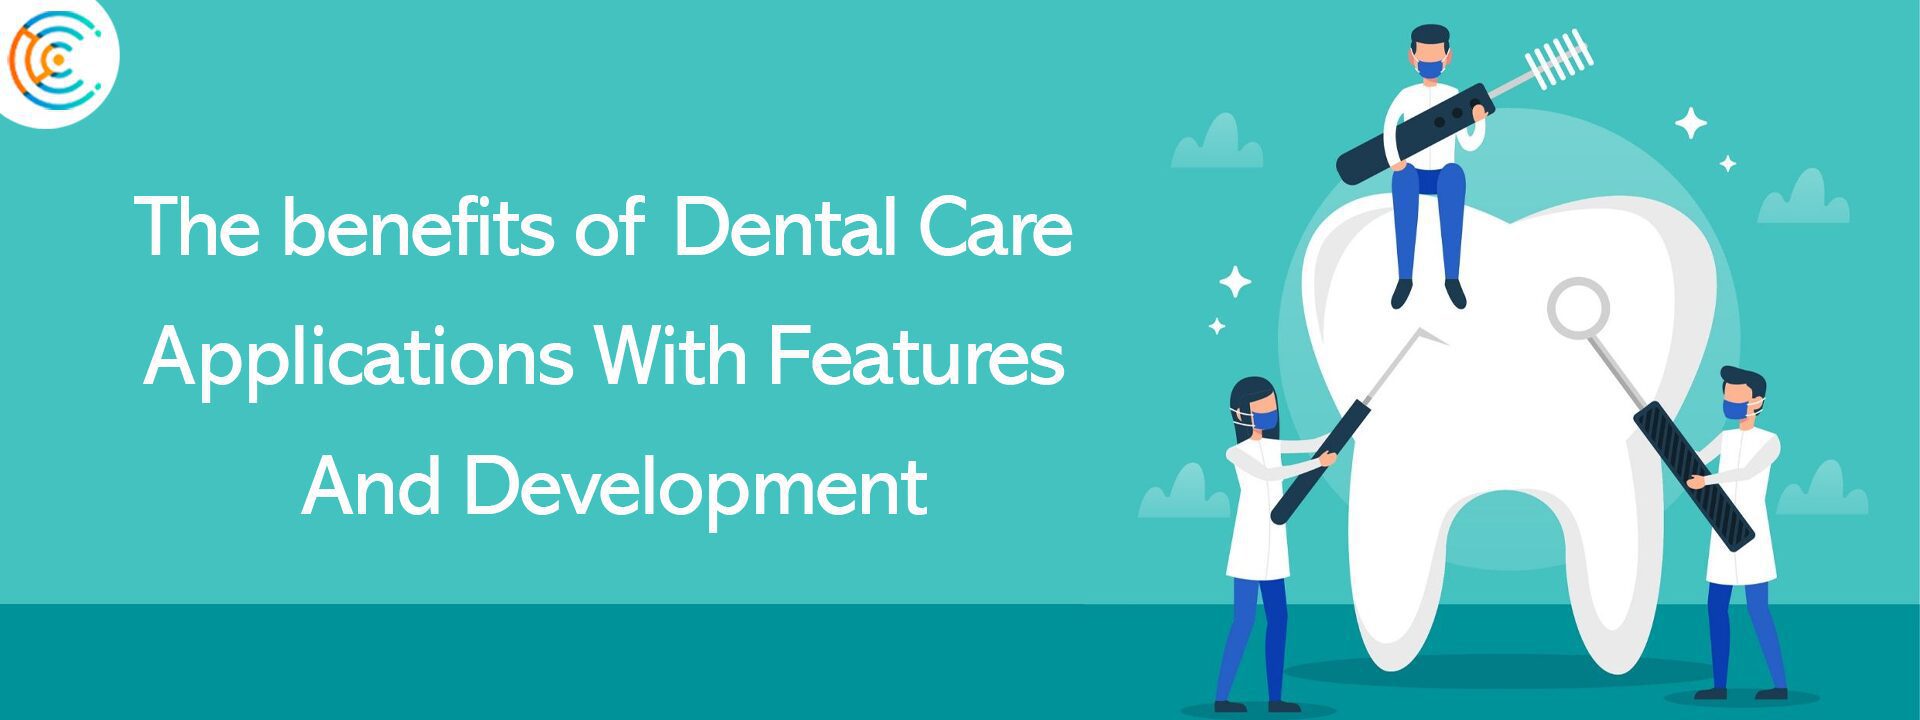 benefits of Dental Care Applications With Features And Development